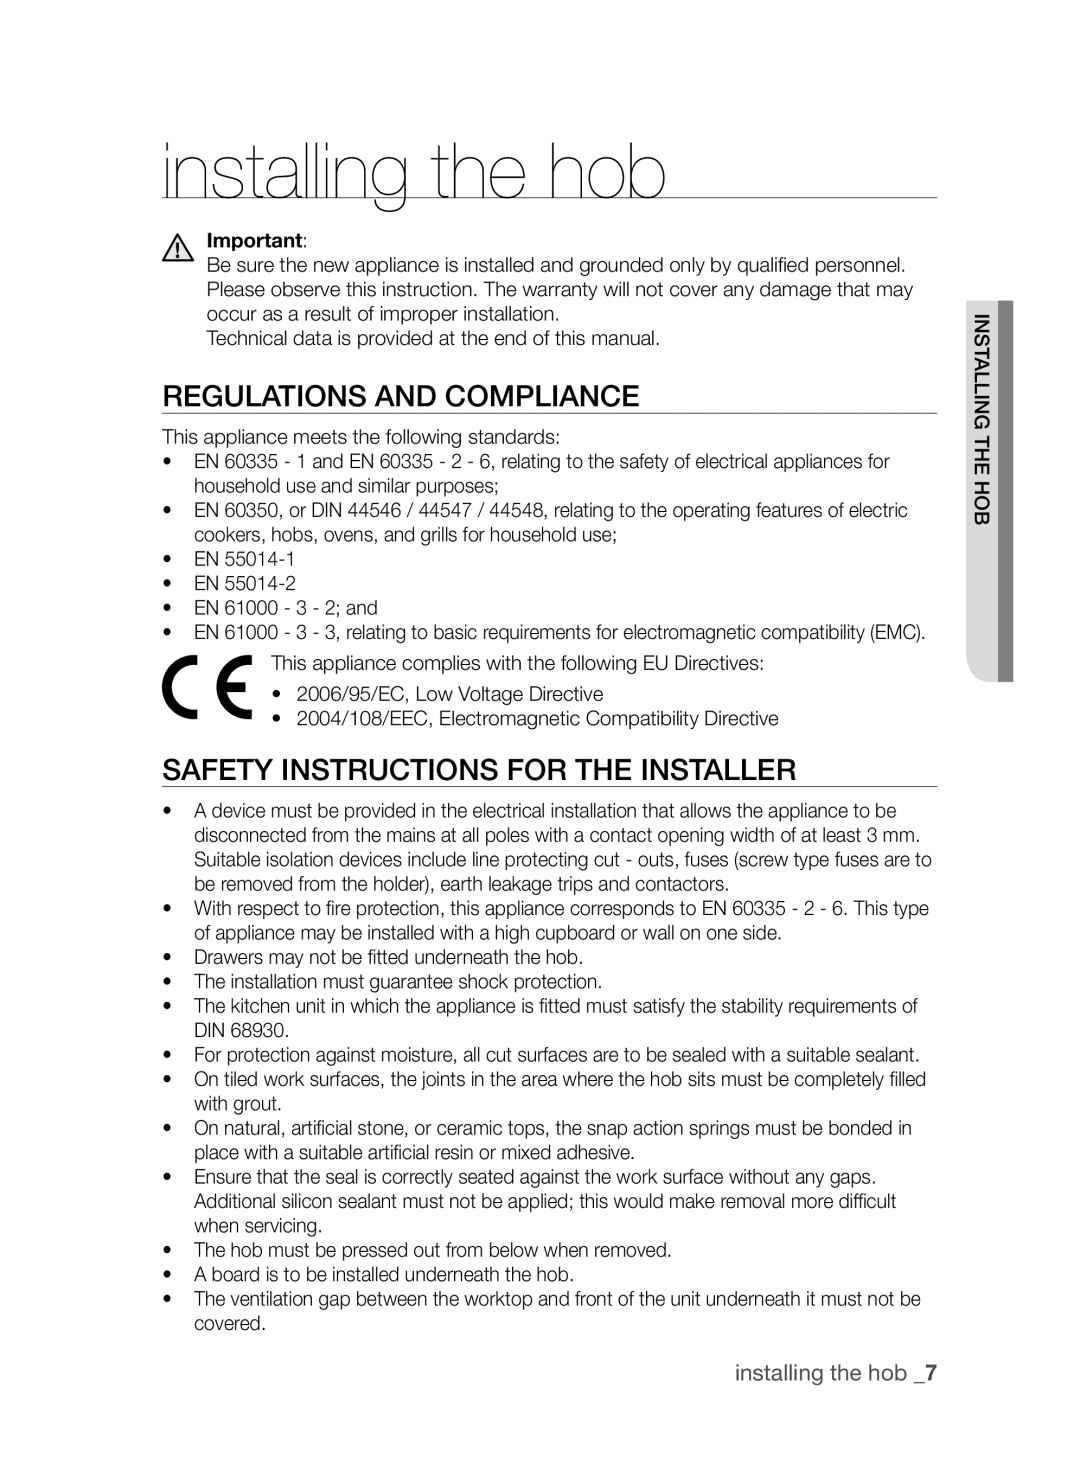 Samsung CTI613EH, CTN364D001 installing the hob, Regulations and compliance, Safety instructions for the installer 